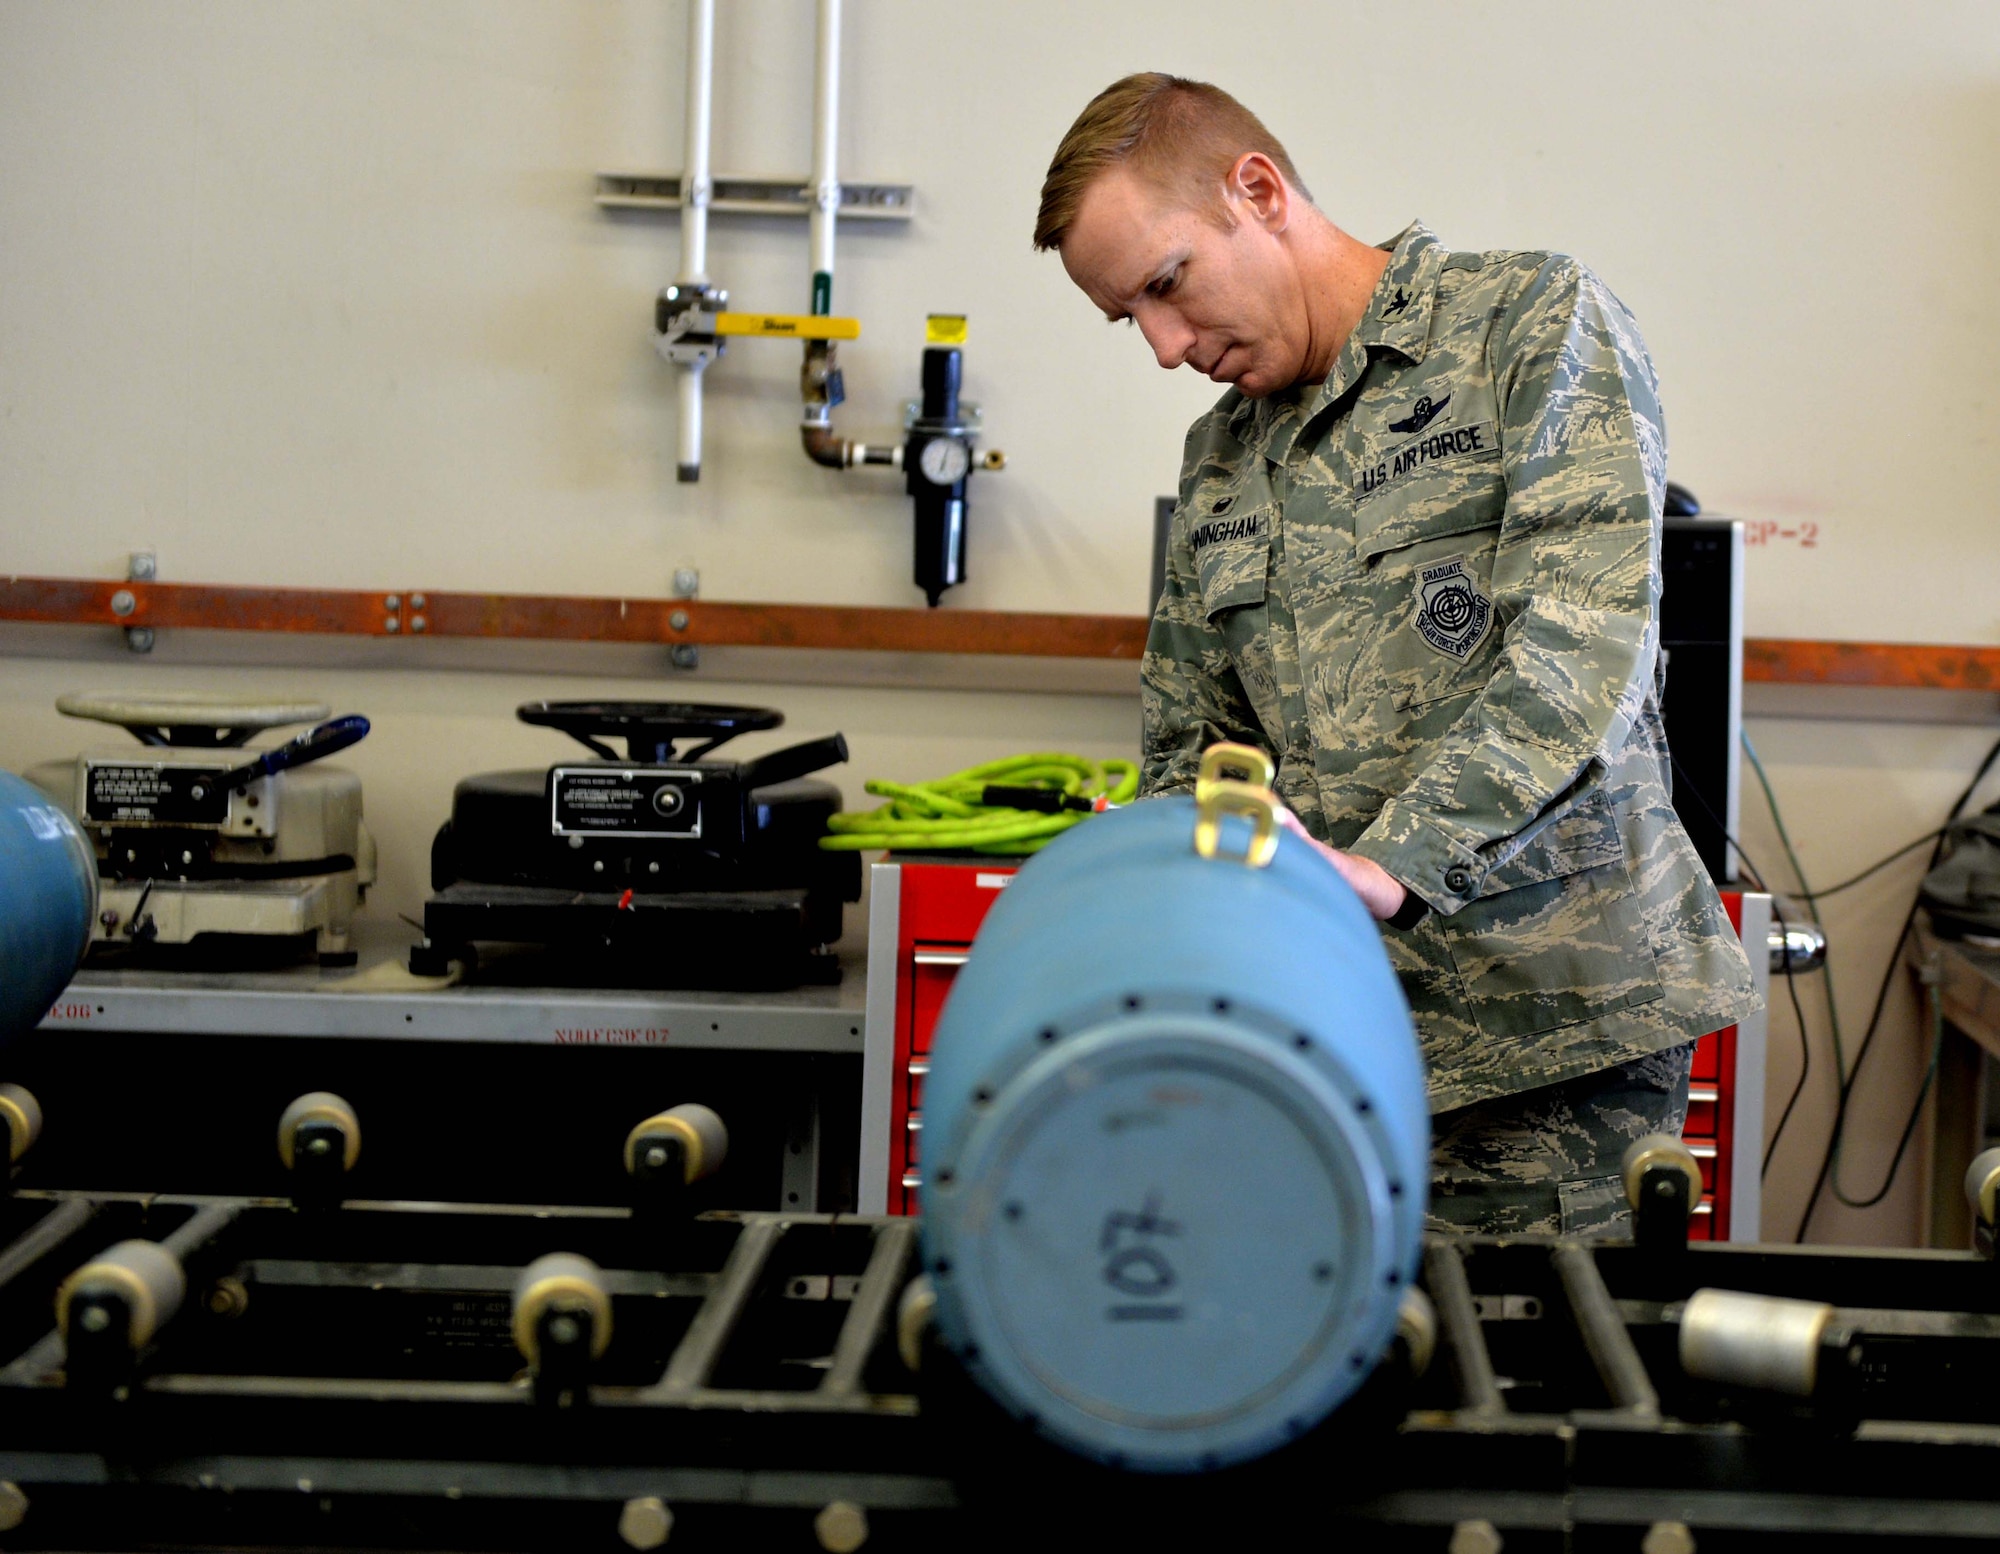 Col. Case Cunningham, 432nd Wing/432nd Air Expeditionary Wing commander, performs maintenance on an inert GBU-12 Paveway II laser-guided bomb April 27, 2016, at Creech Air Force Base, Nevada.  The bombs built will be used for MQ -9 Reaper aircraft training. Cunningham and Chief Master Sgt. Ditore, 432nd Wg/432nd AEW command chief, spent approximately two hours with the munition flight’s production section to perform the build. (U.S. Air Force photo by Airman 1st Class Kristan Campbell/Released).
